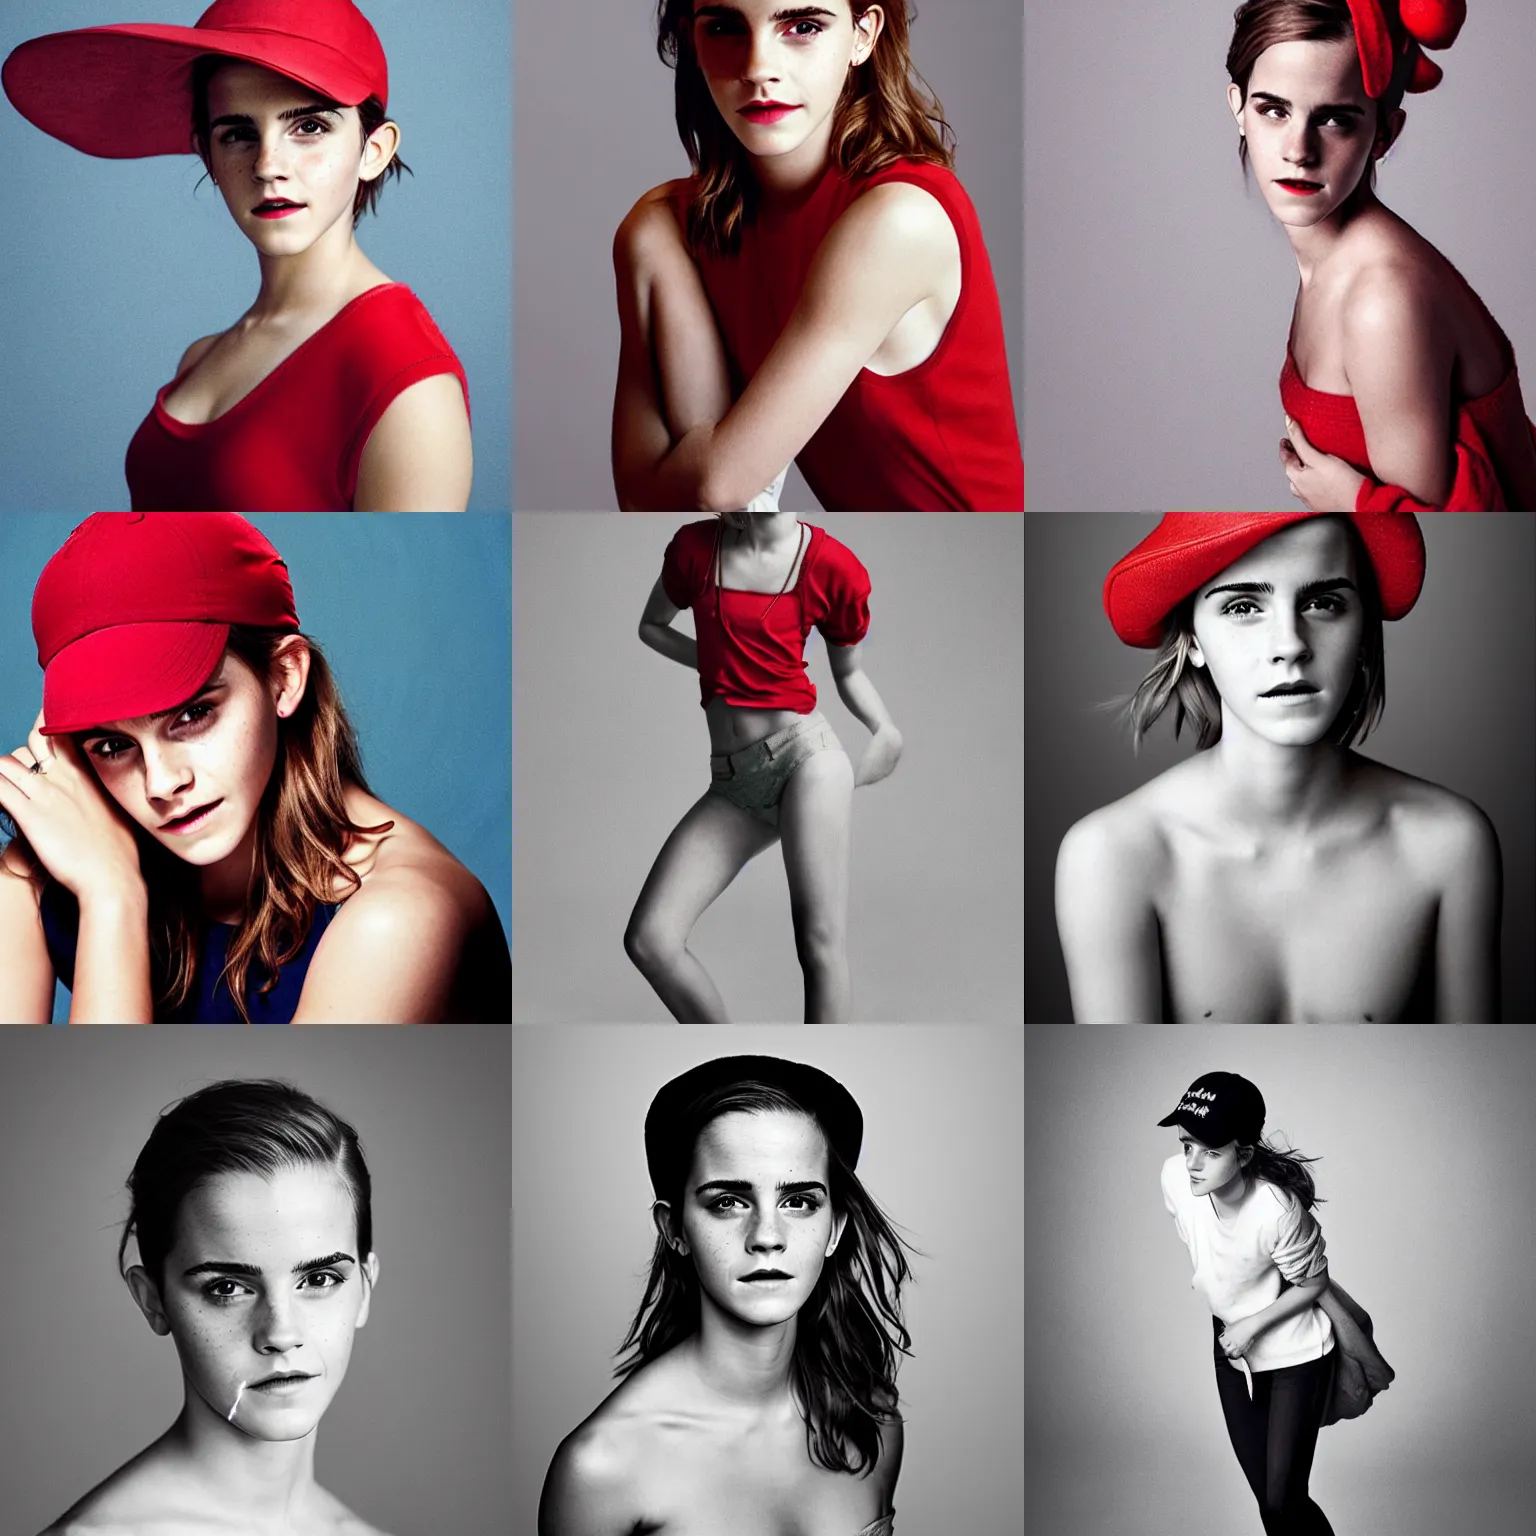 Prompt: Photo of Emma Watson wearing a red cap, soft studio lighting, photo taken by Martin Schoeller for Abercrombie and Fitch, award-winning photograph, 24mm f/1.4